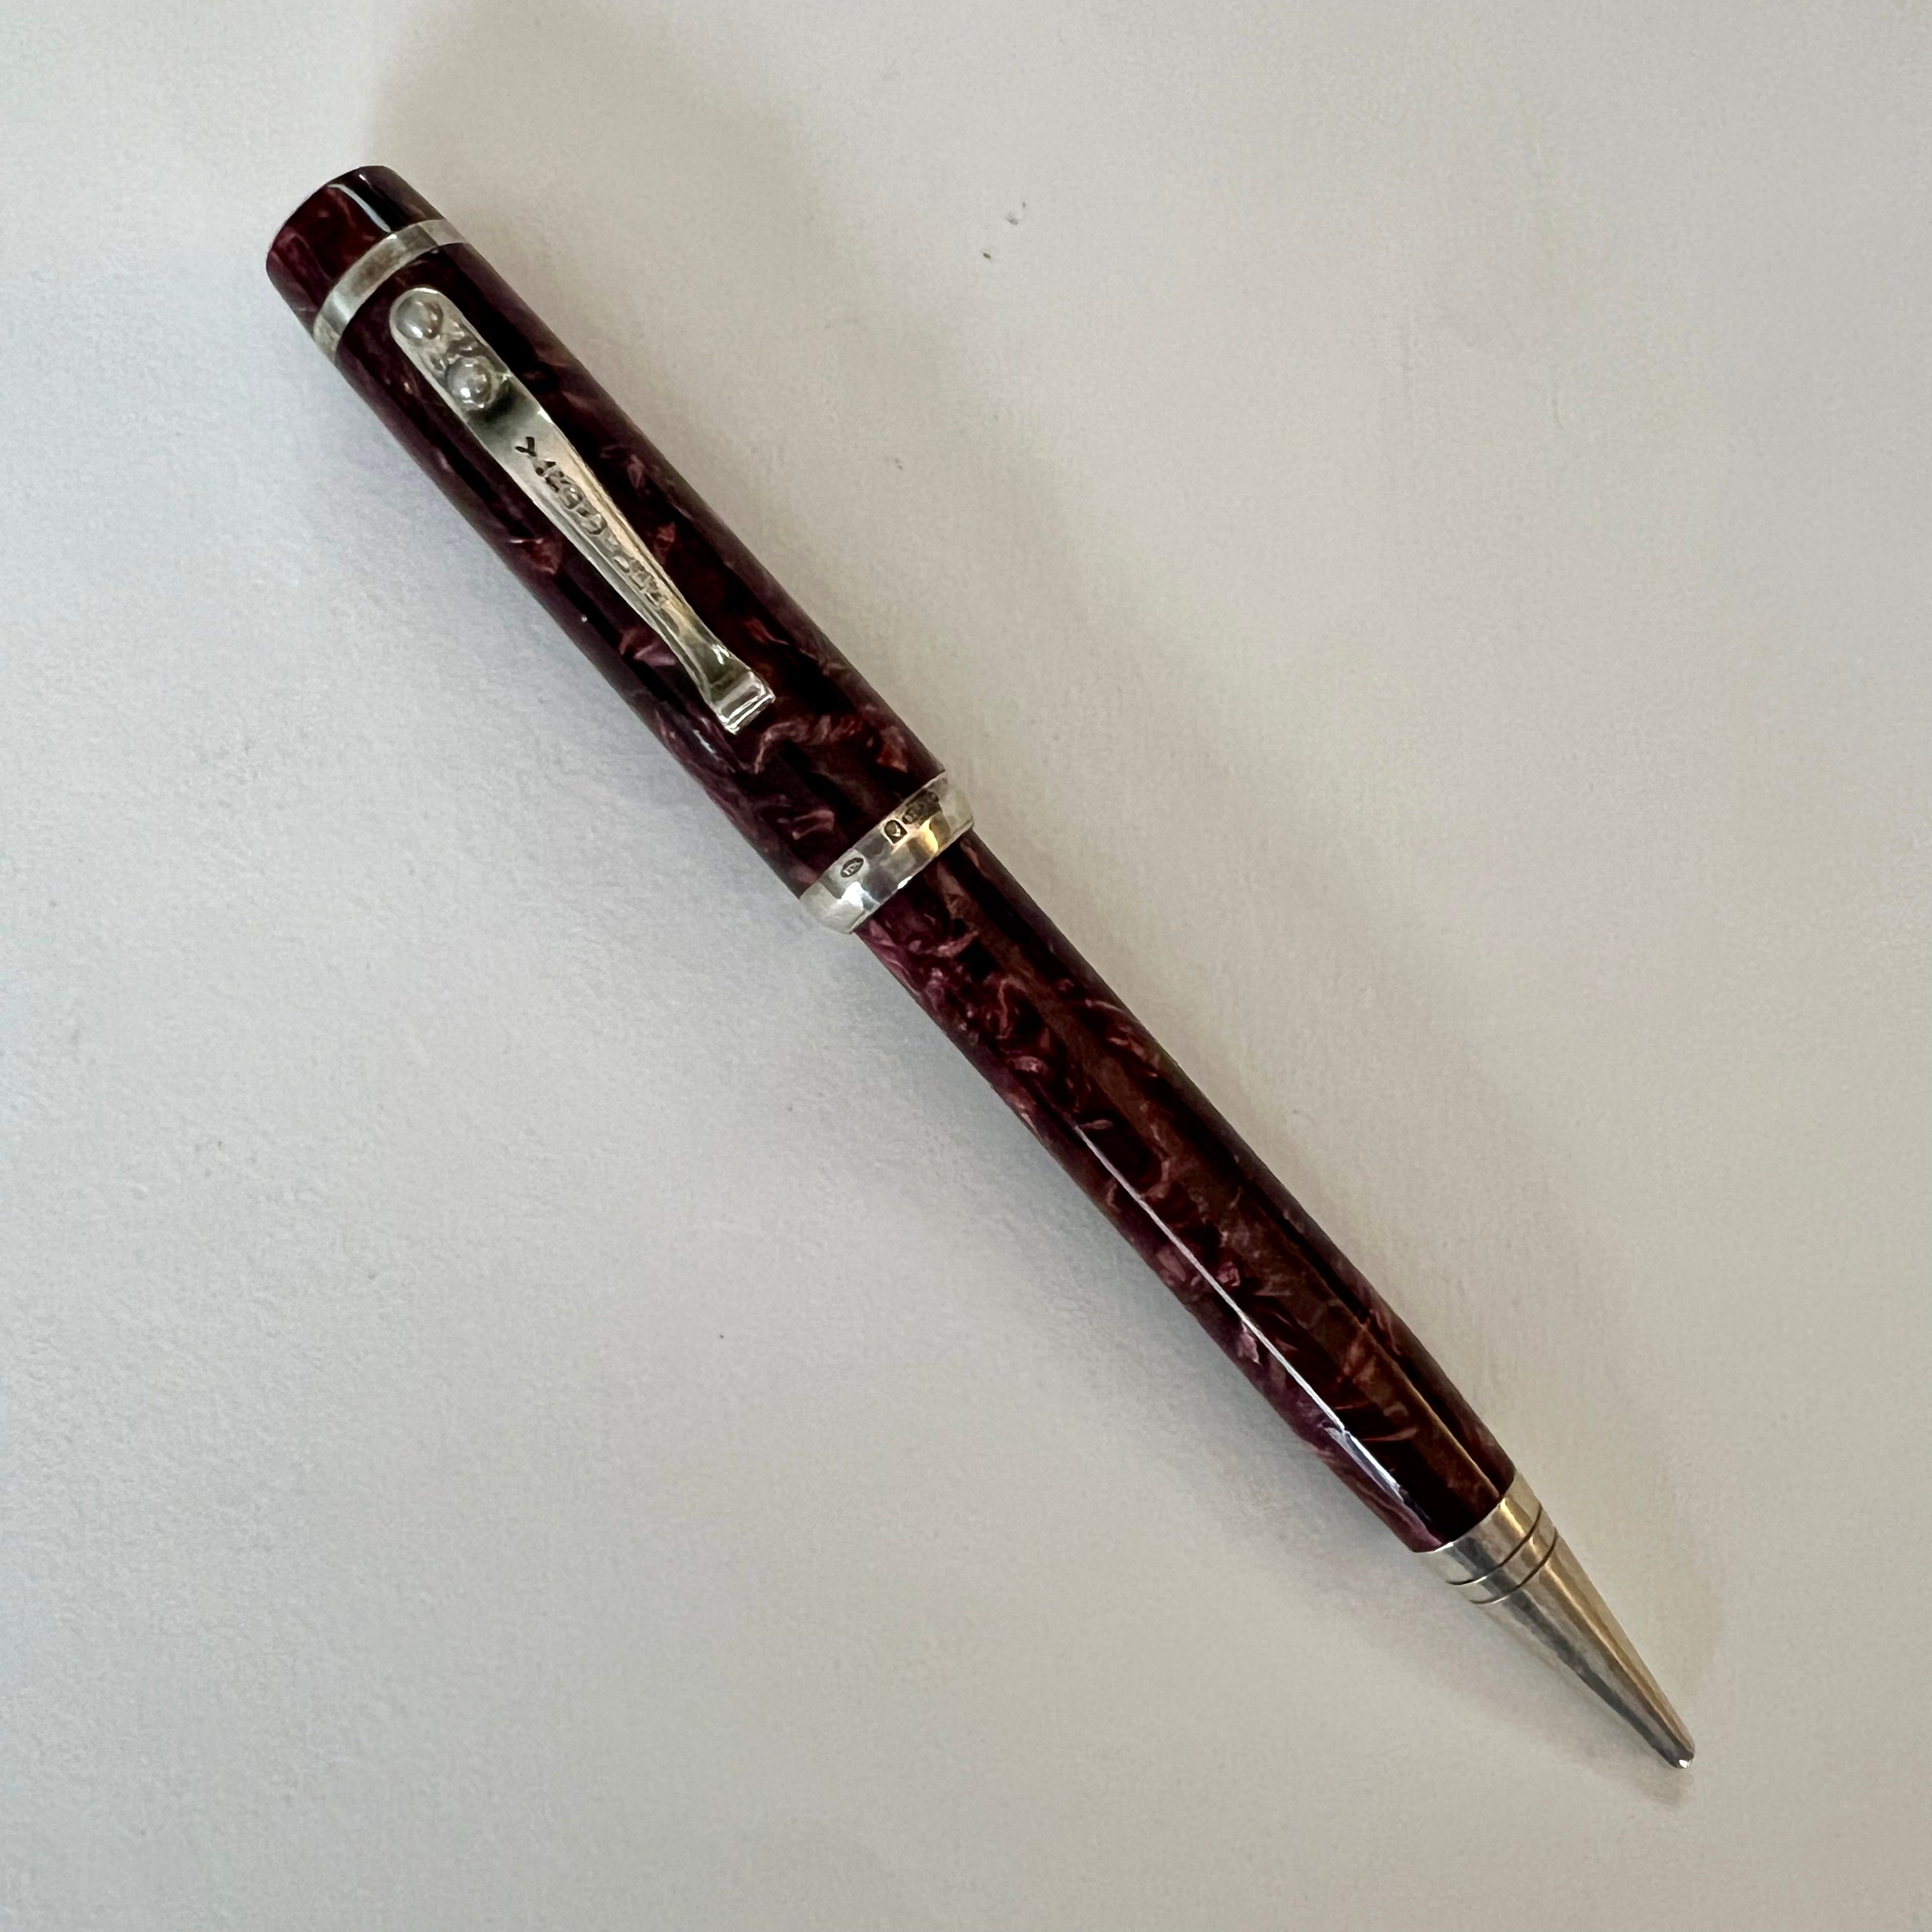 Pre-Loved Writing Instruments